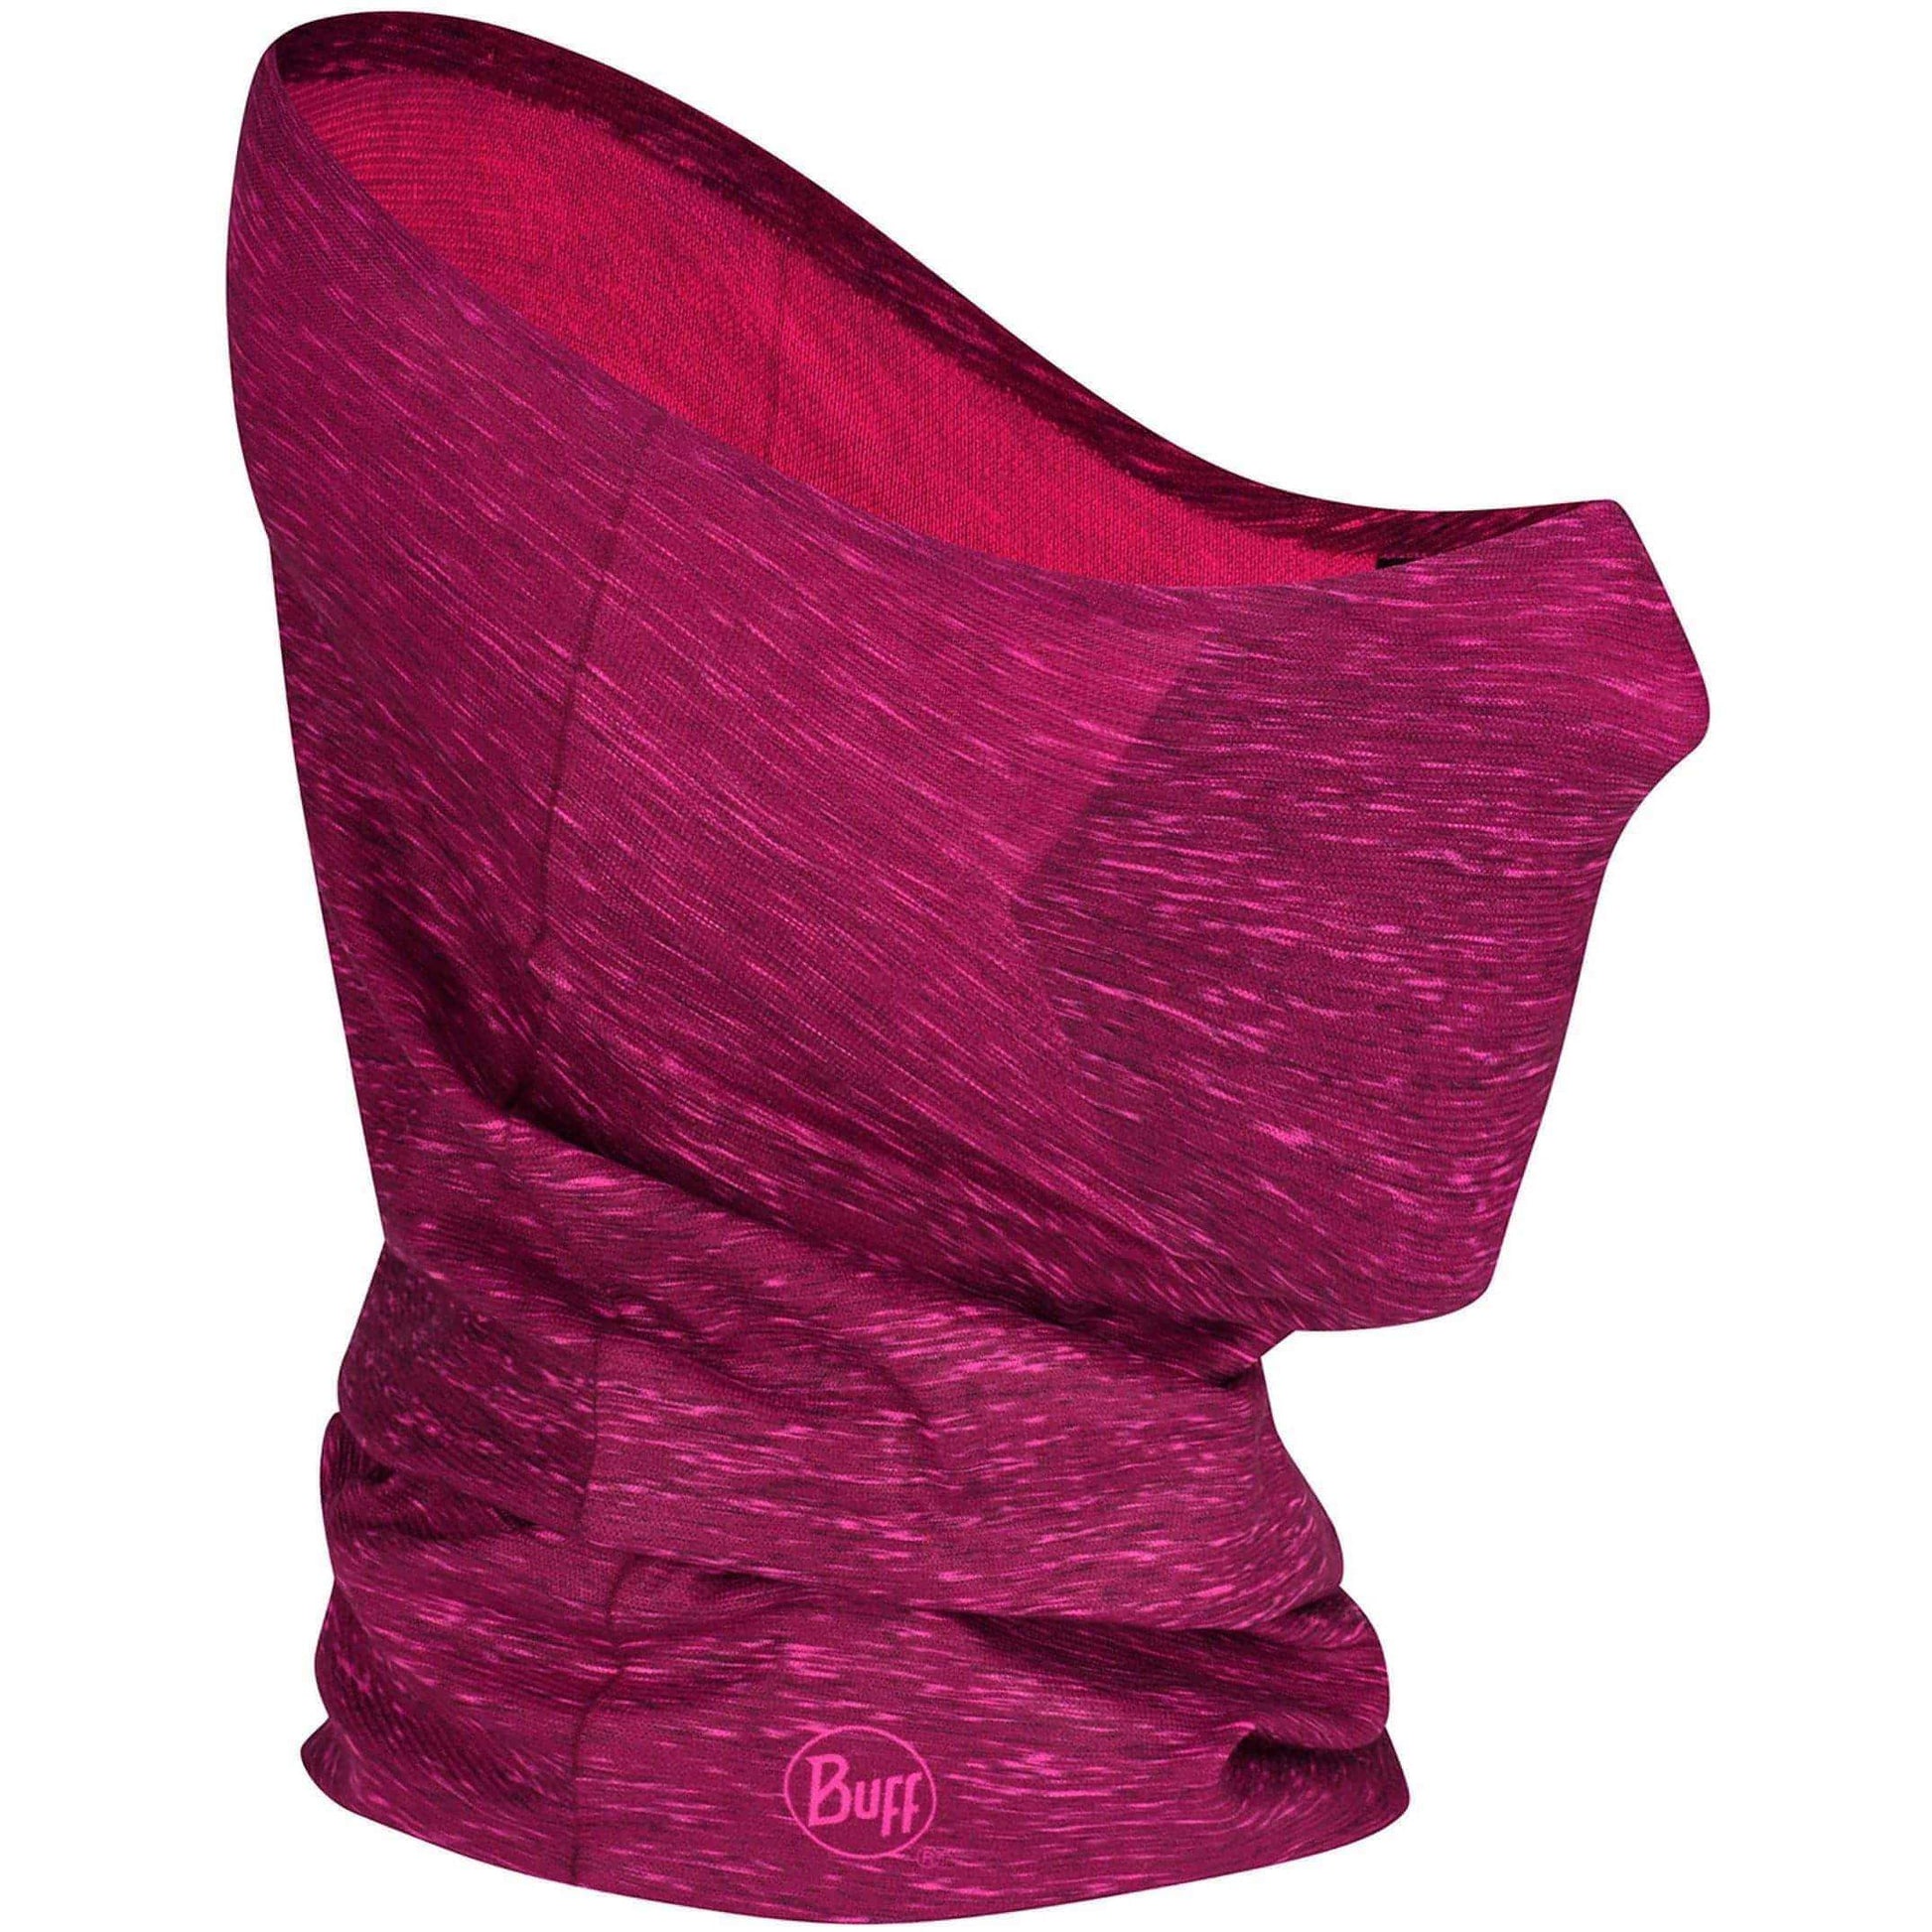 Buff Filter Tube Pump Pink Heather Face Covering 8428927449924 - Start Fitness